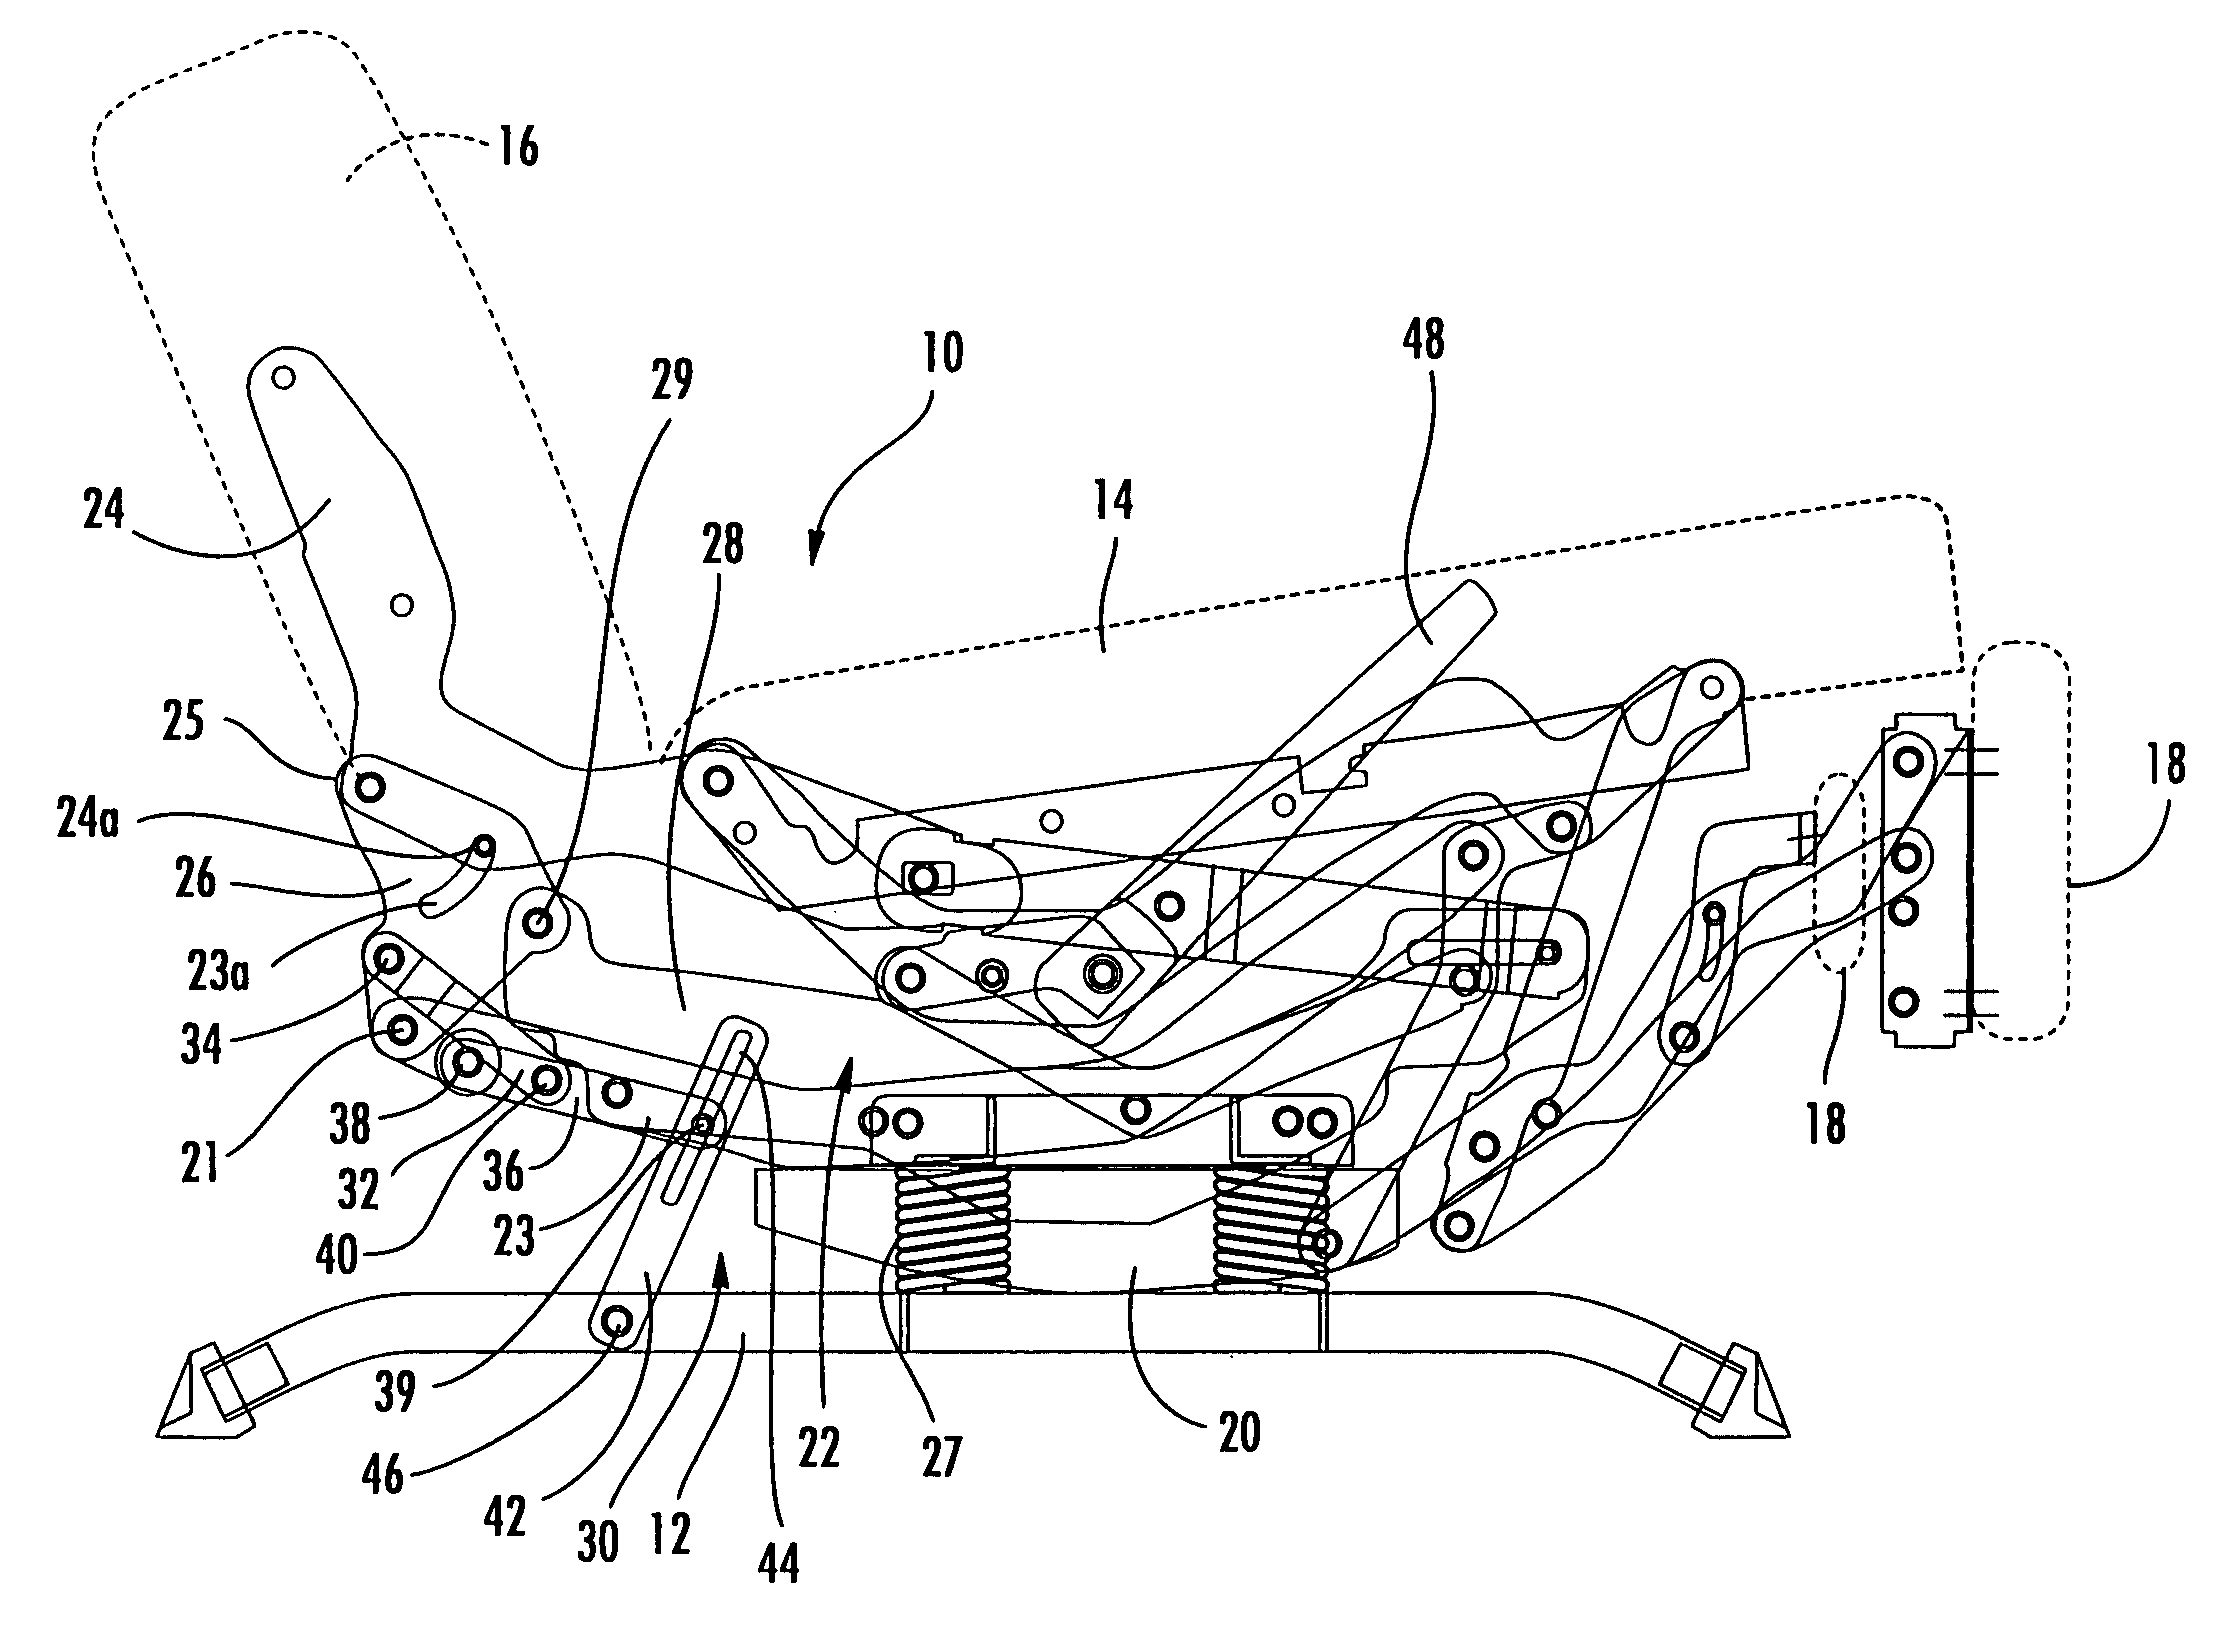 Rocking-reclining seating unit with motion lock